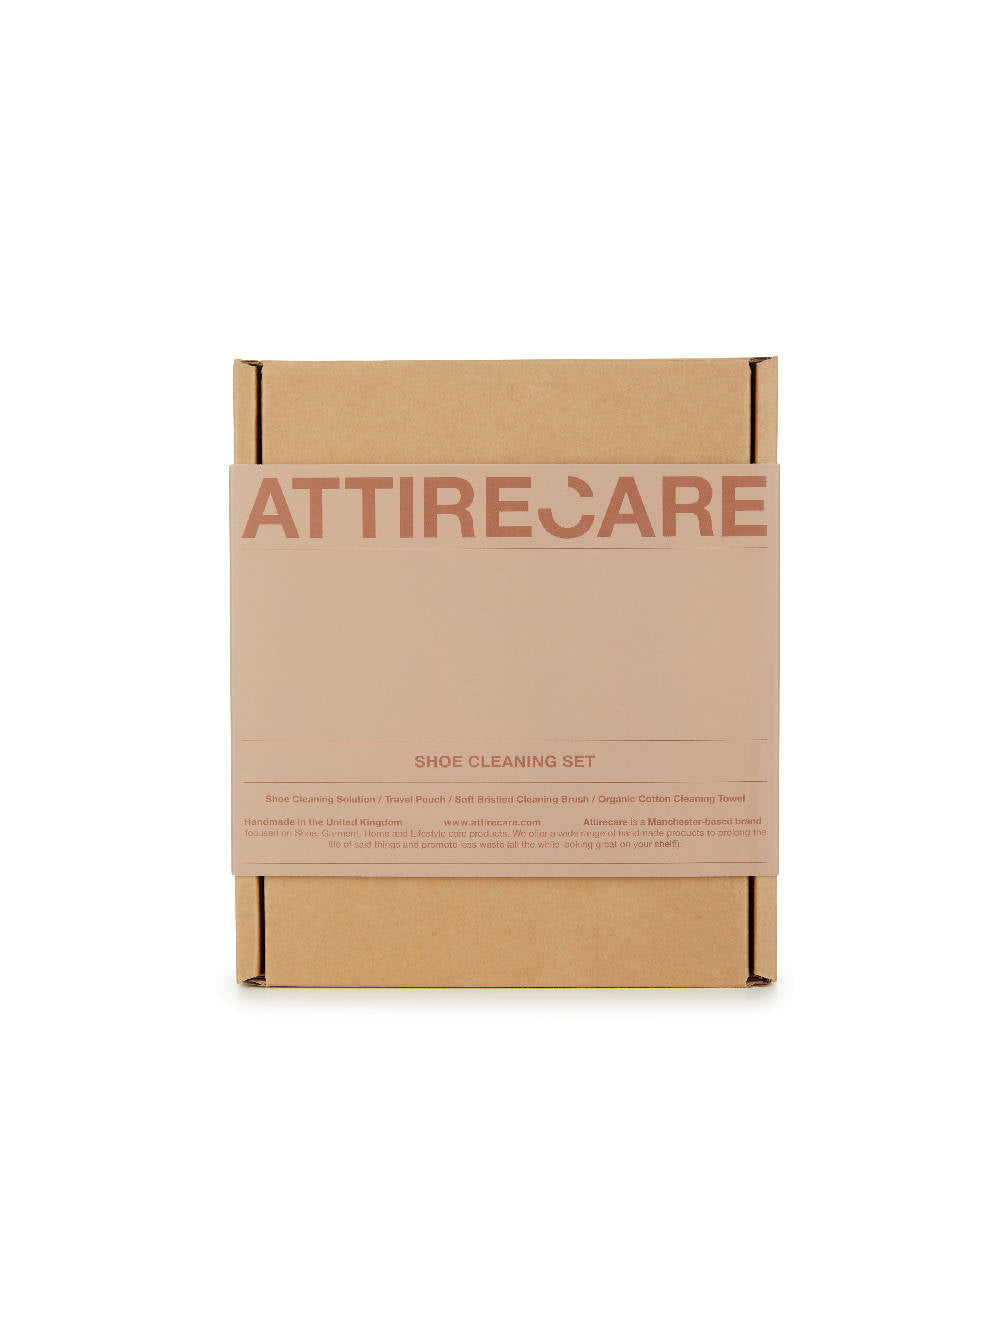 Attire Care Shoe Cleaning Set